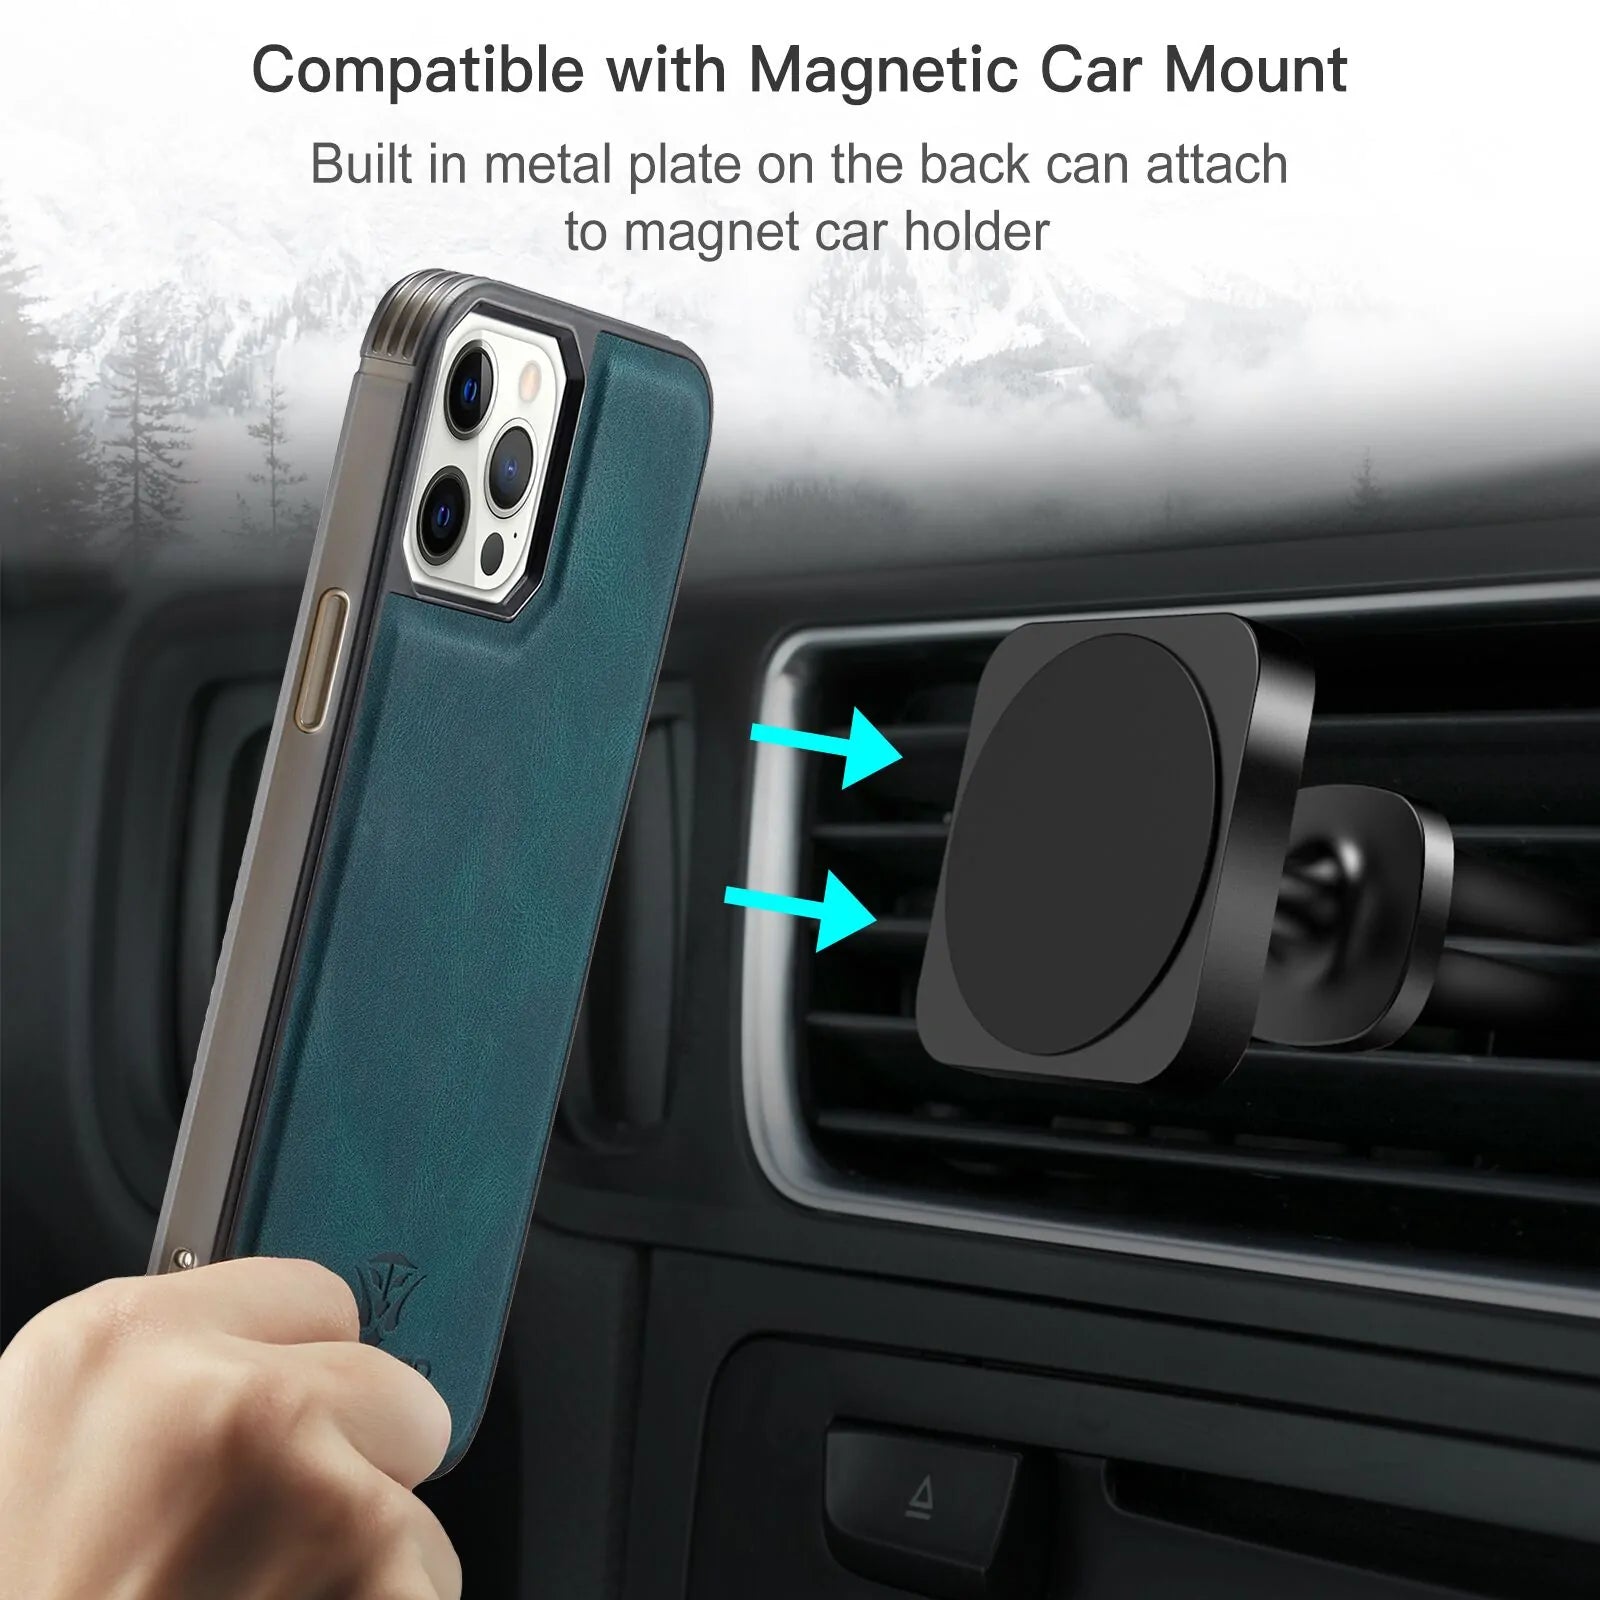 Luxury Magnetic Safe Leather Case For iPhone